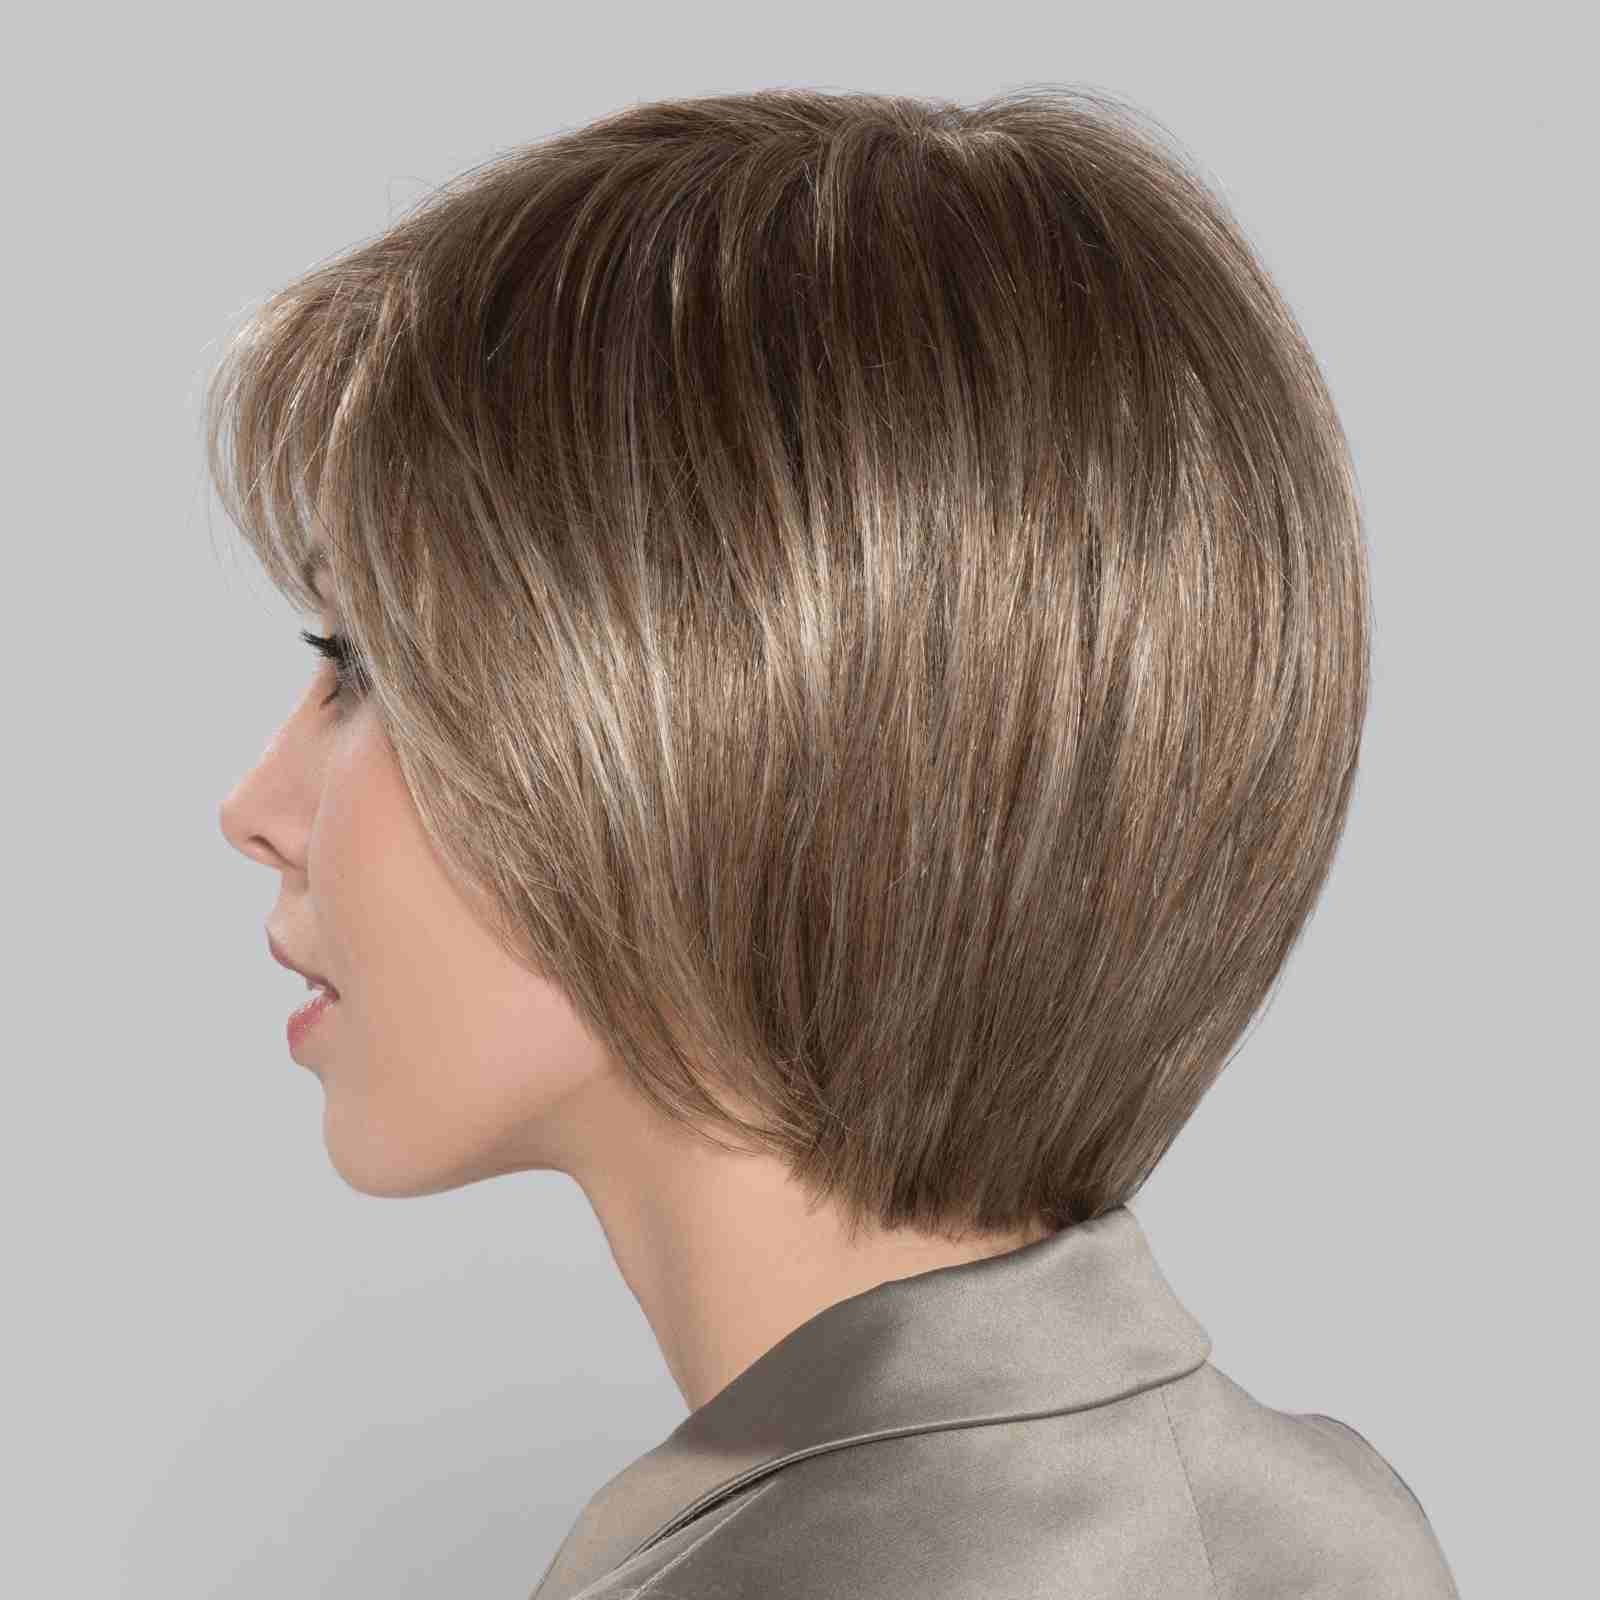 Shine Comfort Wig by Ellen Wille is a shorter length bob. With a 100% hand-tied cap and a fine elastic tulle crown